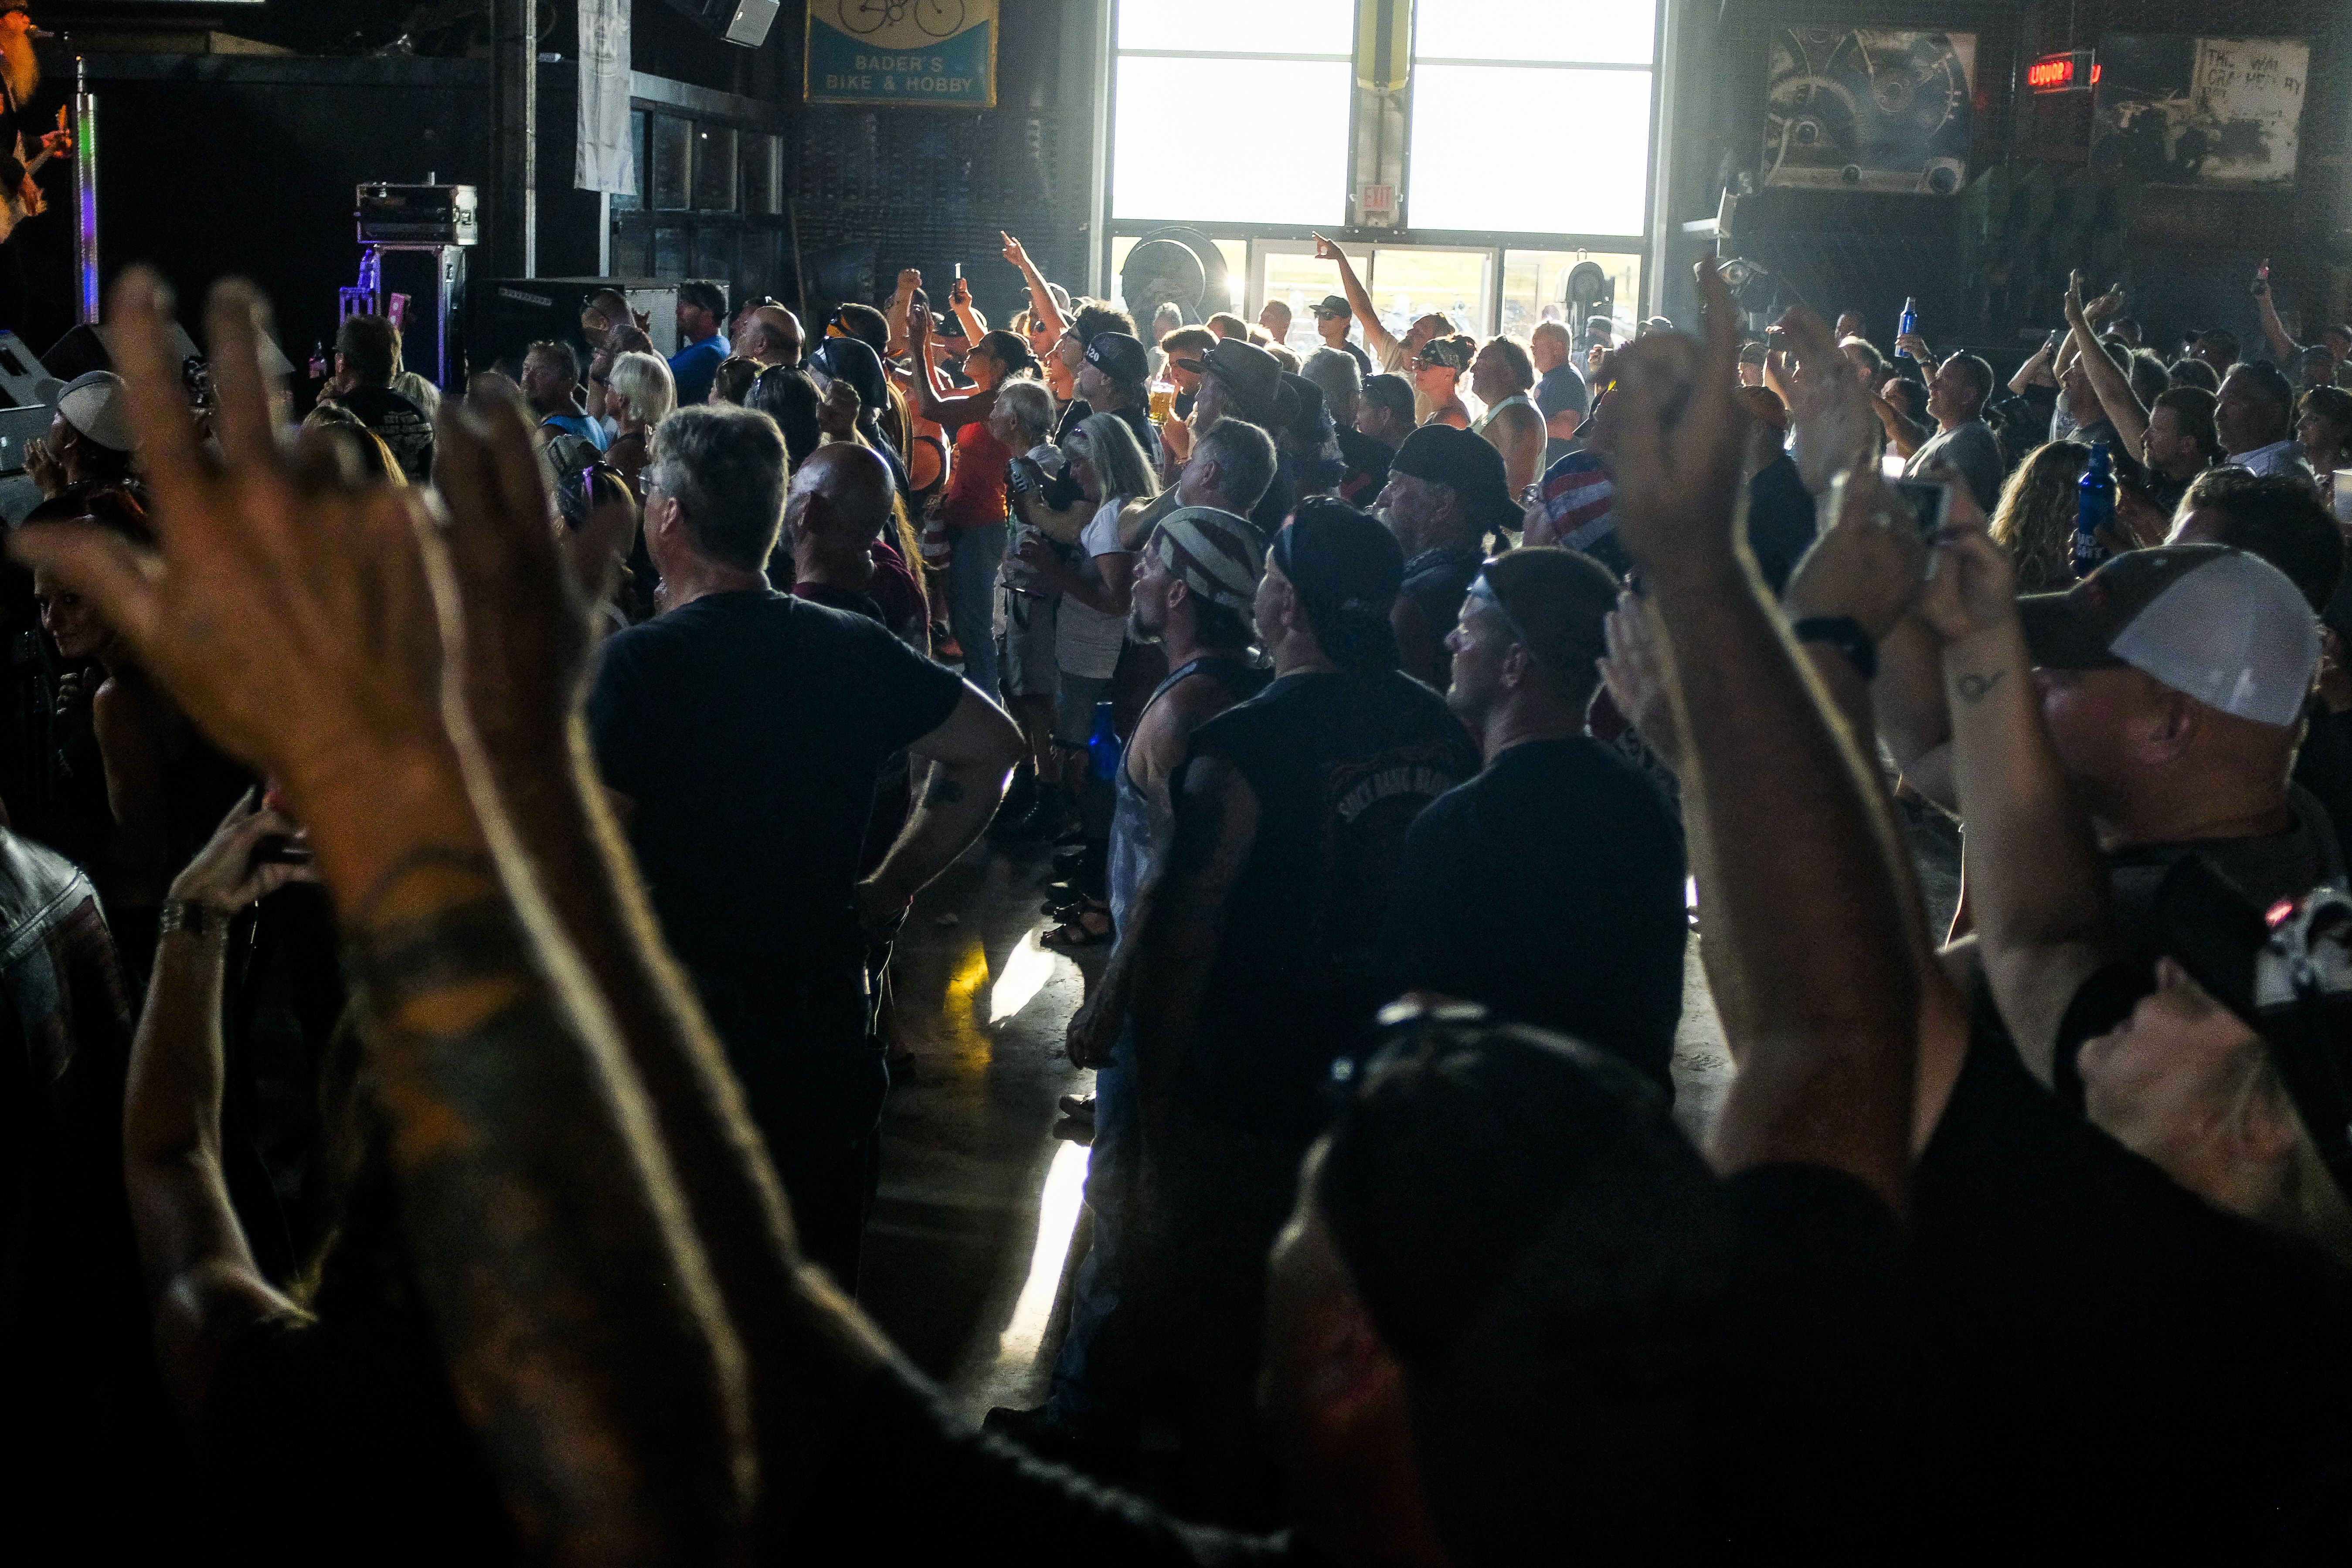 People cheer during a concert in a saloon on August 7.